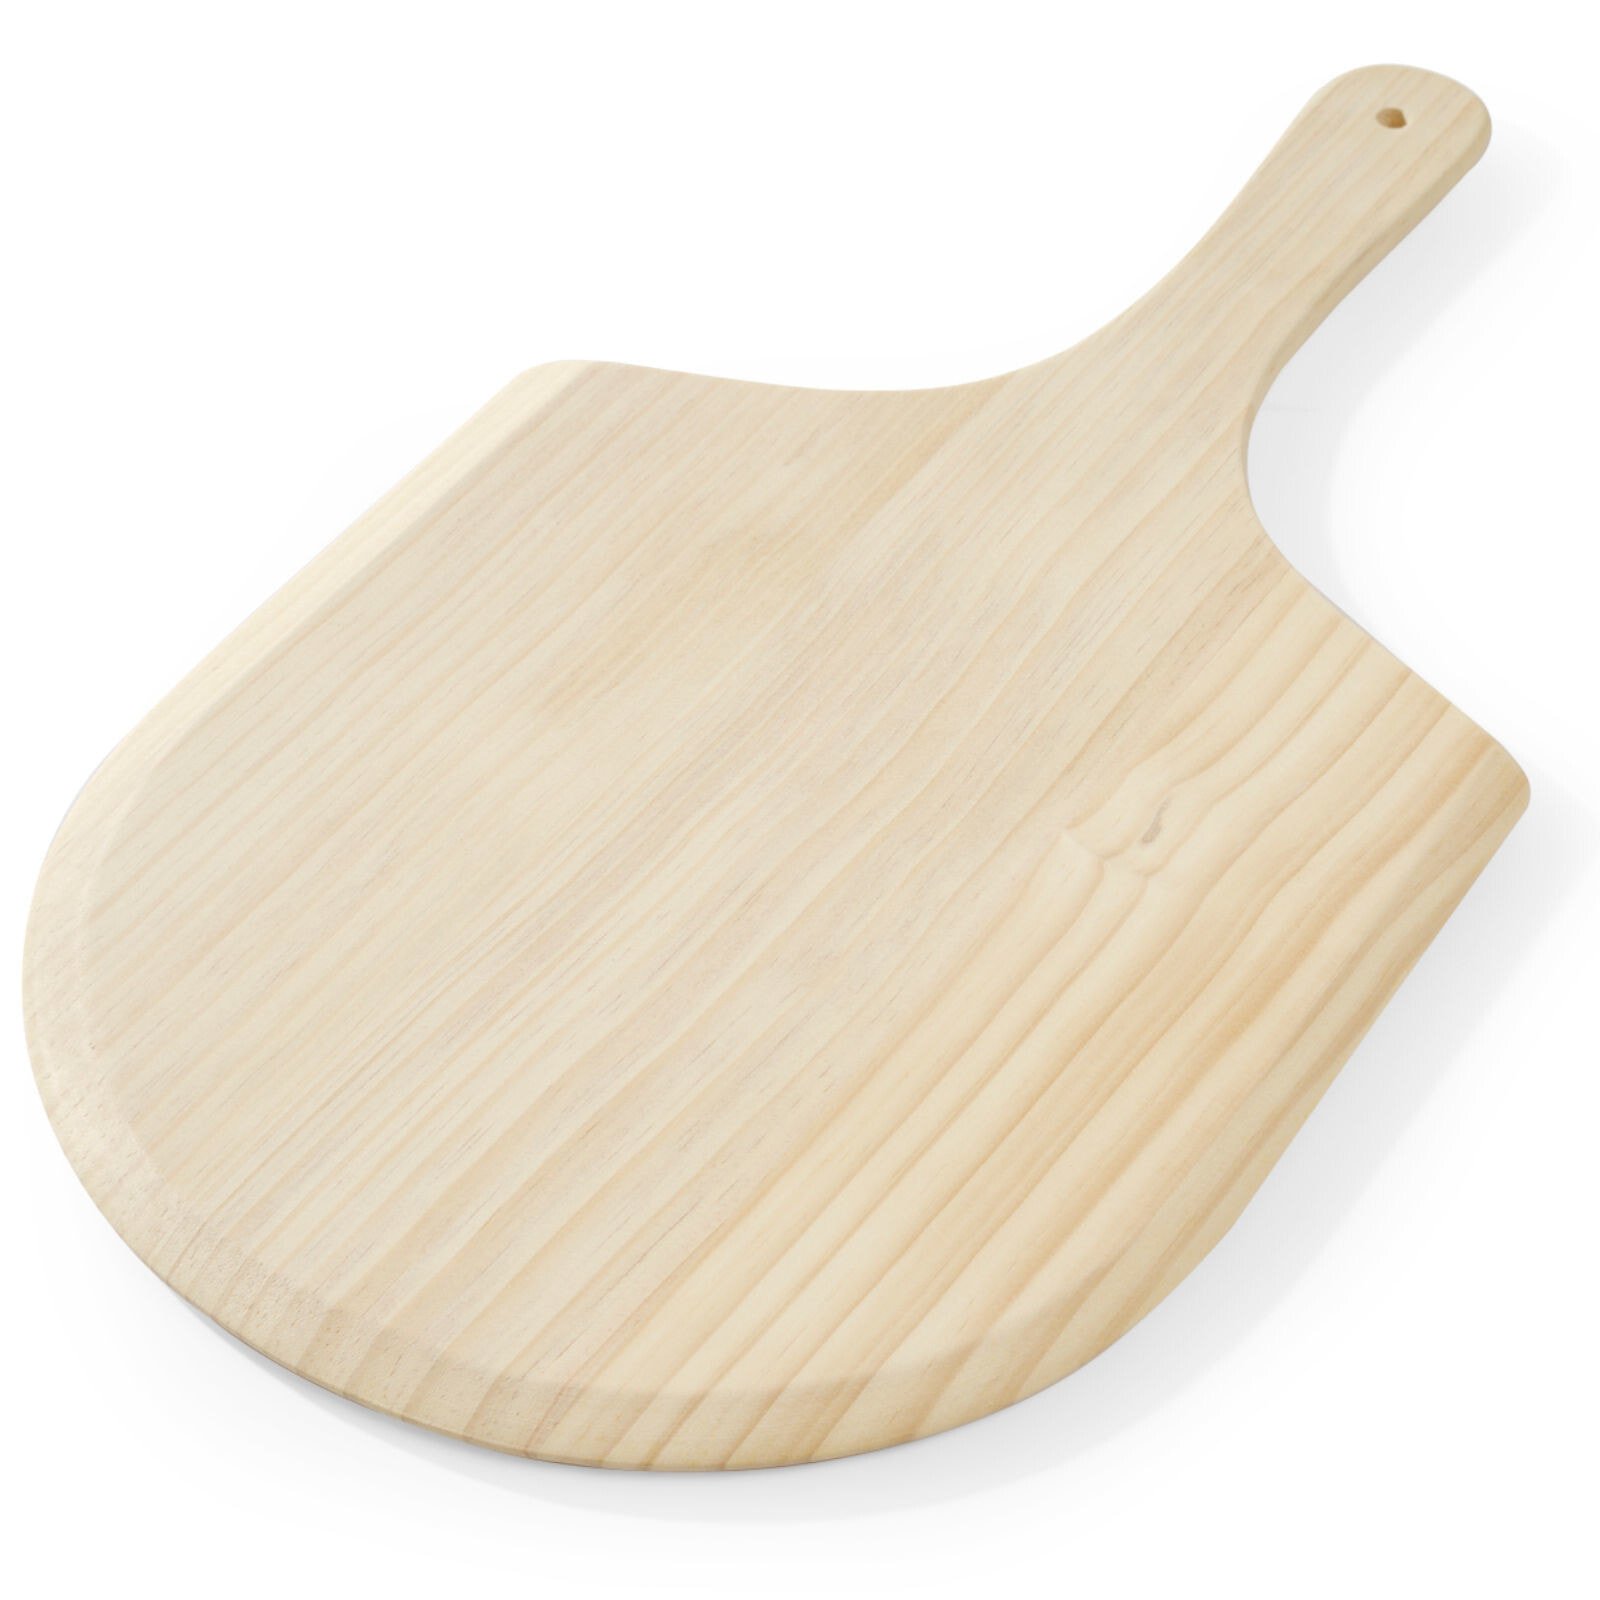 Shovel for bread pizza removal from the oven, wooden 305 x 535 x 10 mm - Hendi 617724